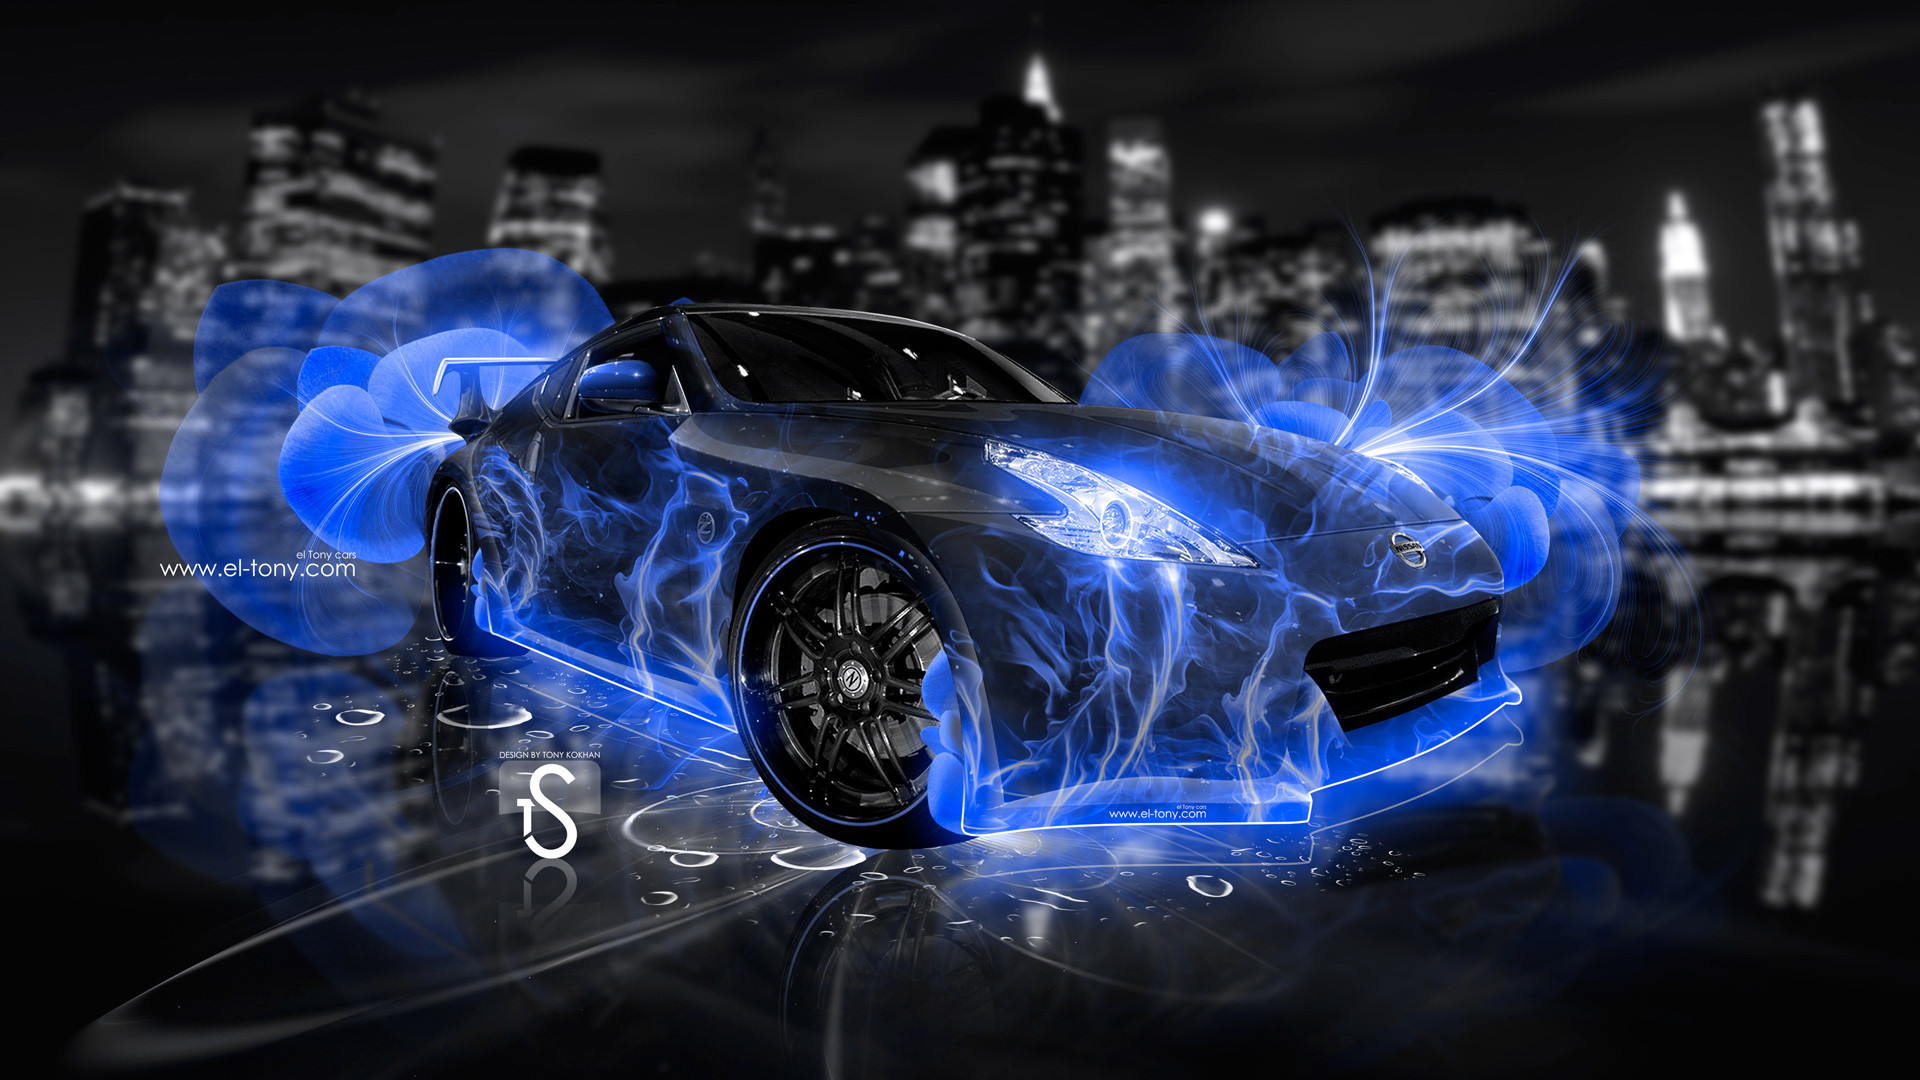 1920x1080 emerg e abstract violet neon car 2013 hd wallpapers design by tony Car  